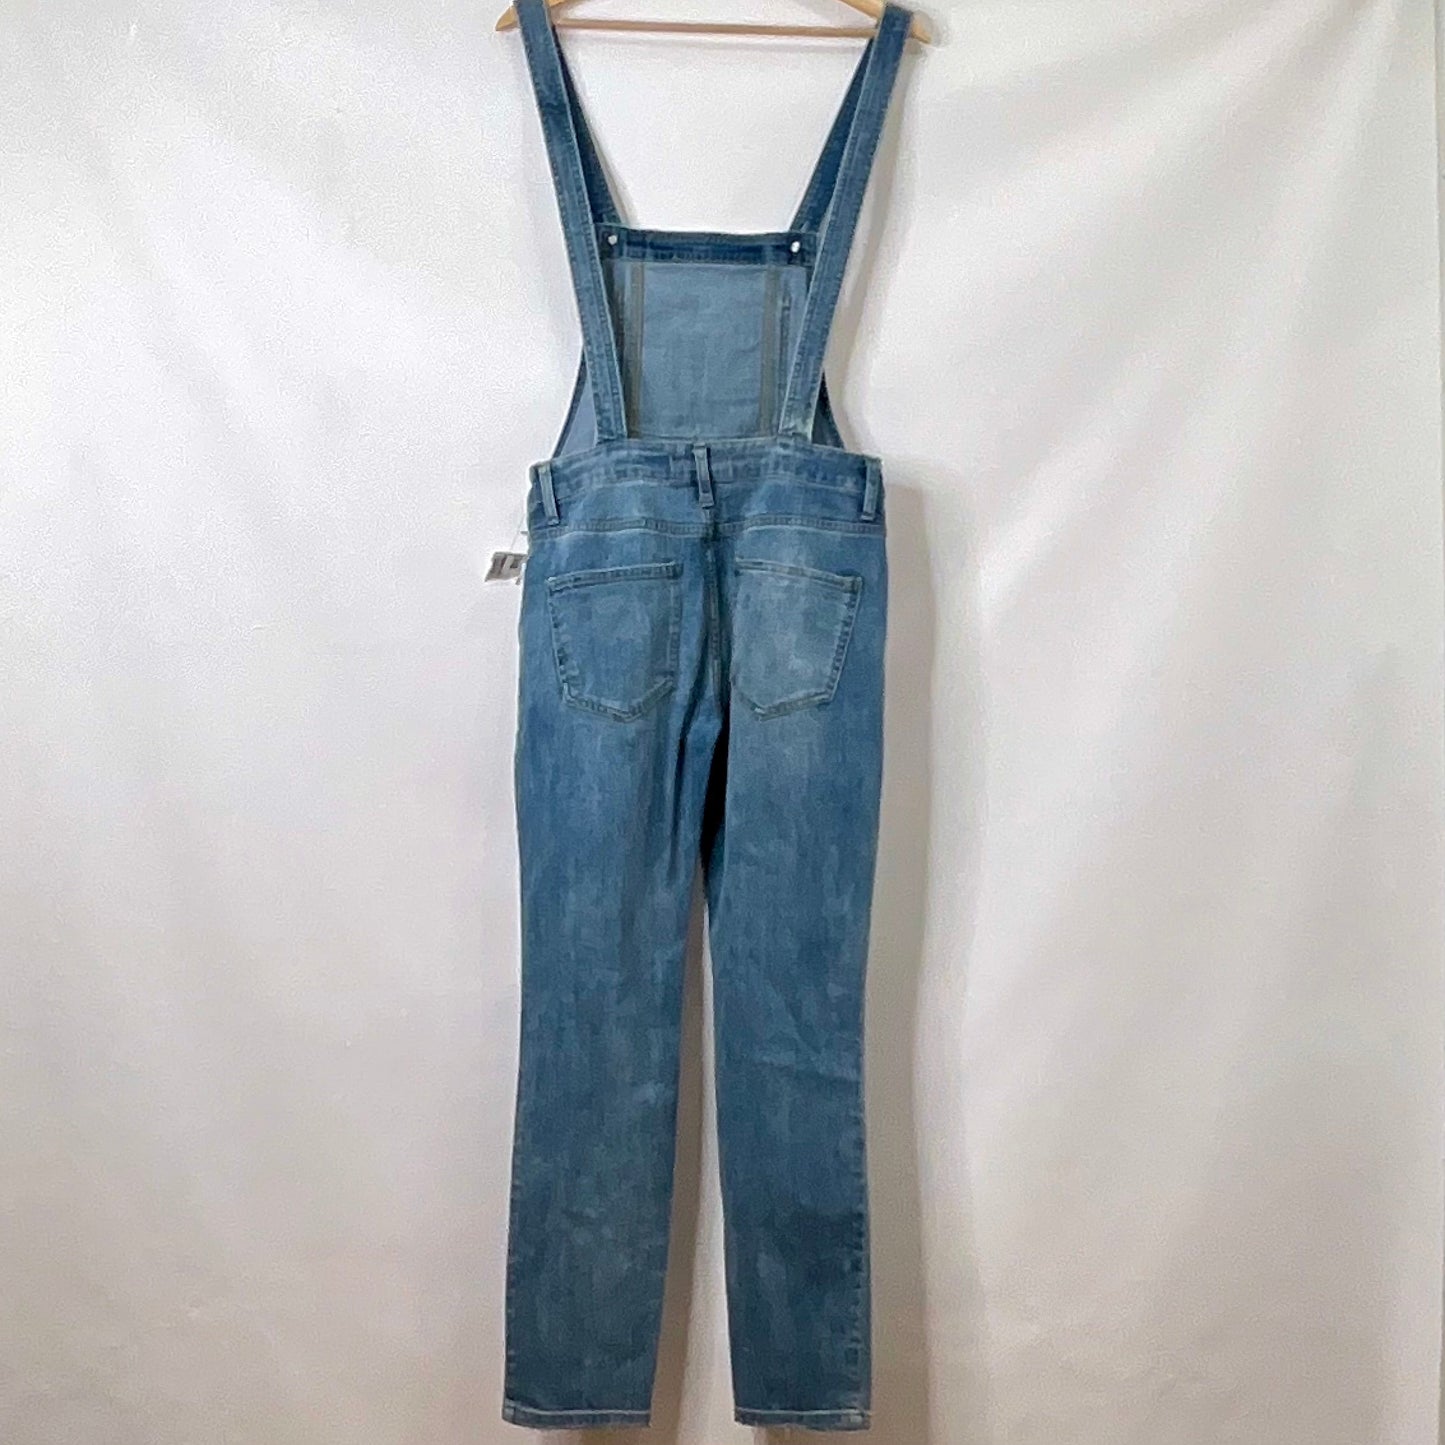 Blue Overalls Free People, Size 4